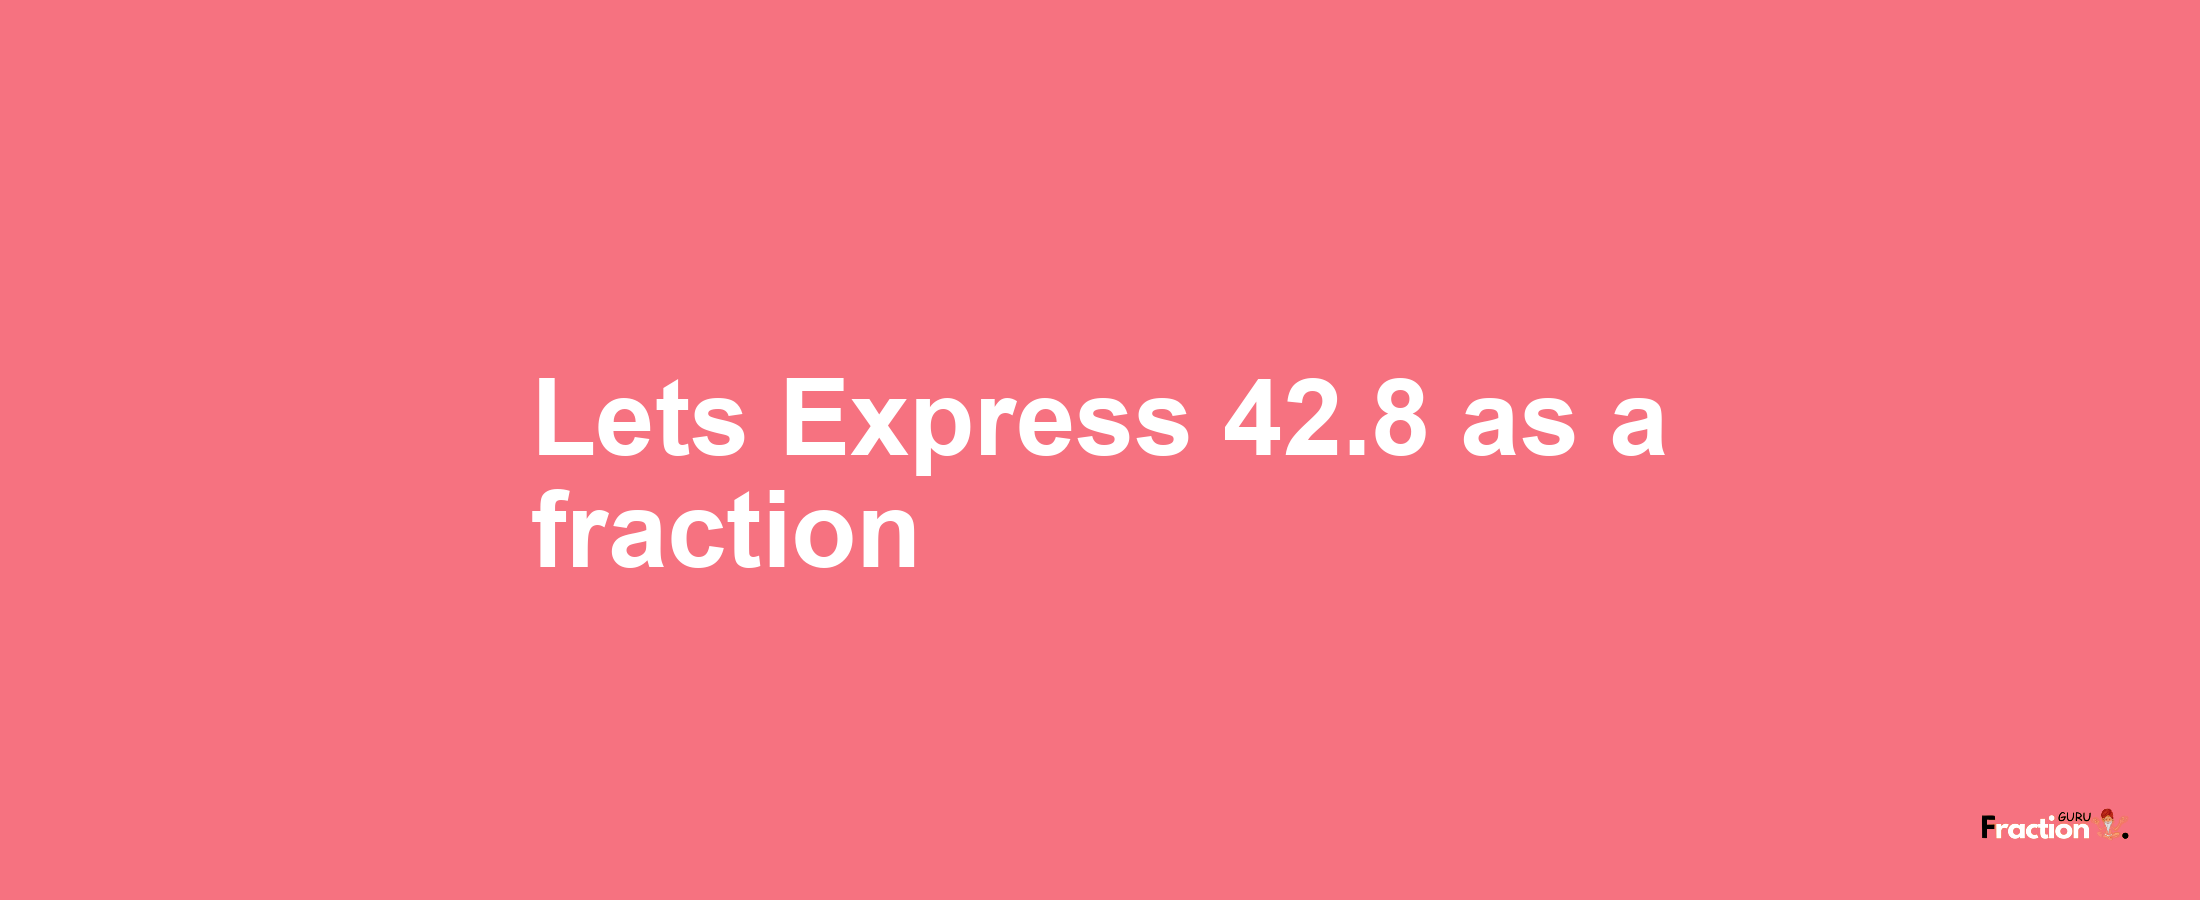 Lets Express 42.8 as afraction